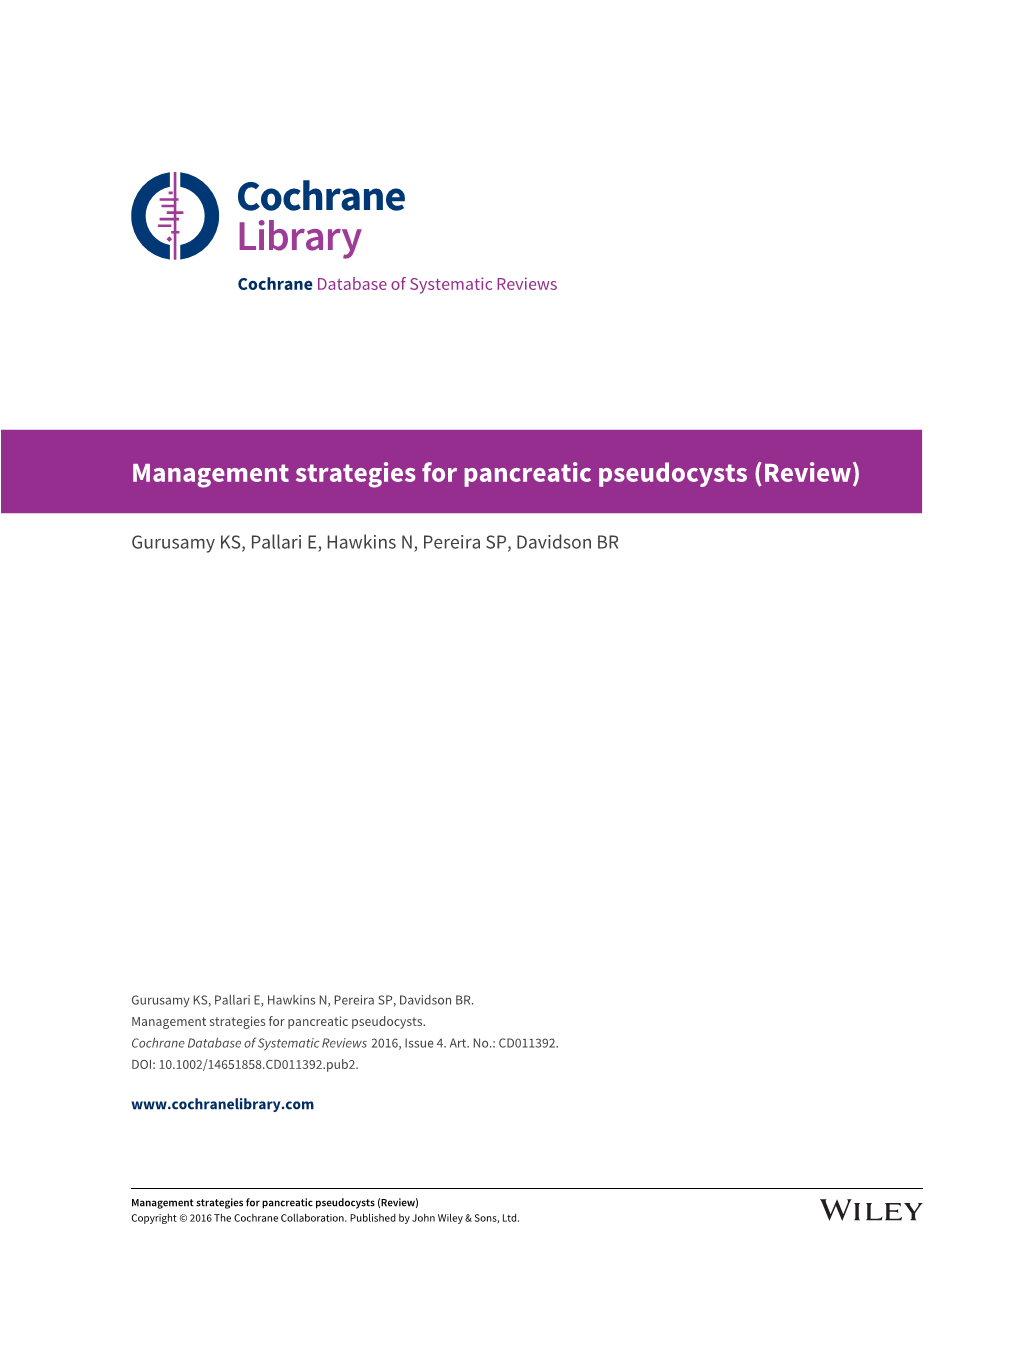 Management Strategies for Pancreatic Pseudocysts (Review)